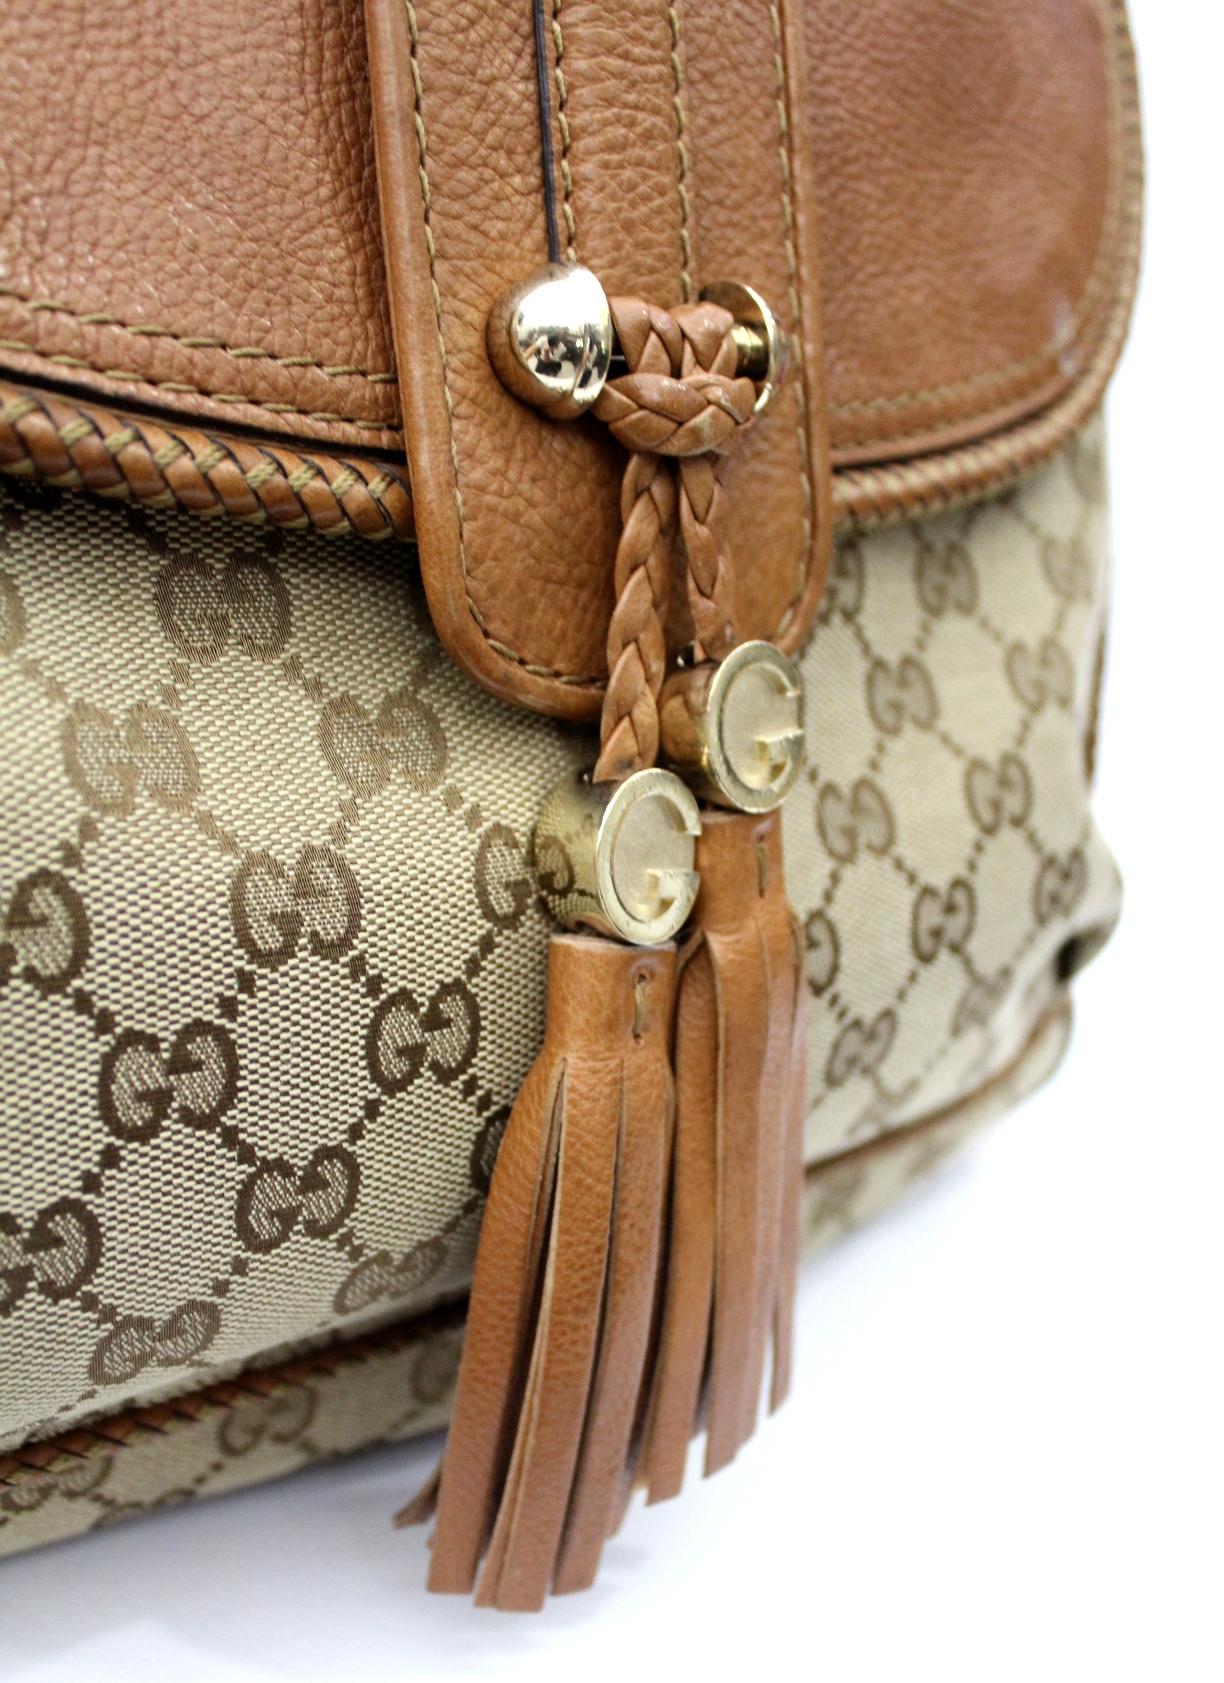 Gucci bag, Marrakech model, in the classic GG logo and in camel-colored leather.
Wearable on the shoulder thanks to its leather handle.
Closure with magnetic button, internally capacious and equipped with various pockets (has some stains).Externally